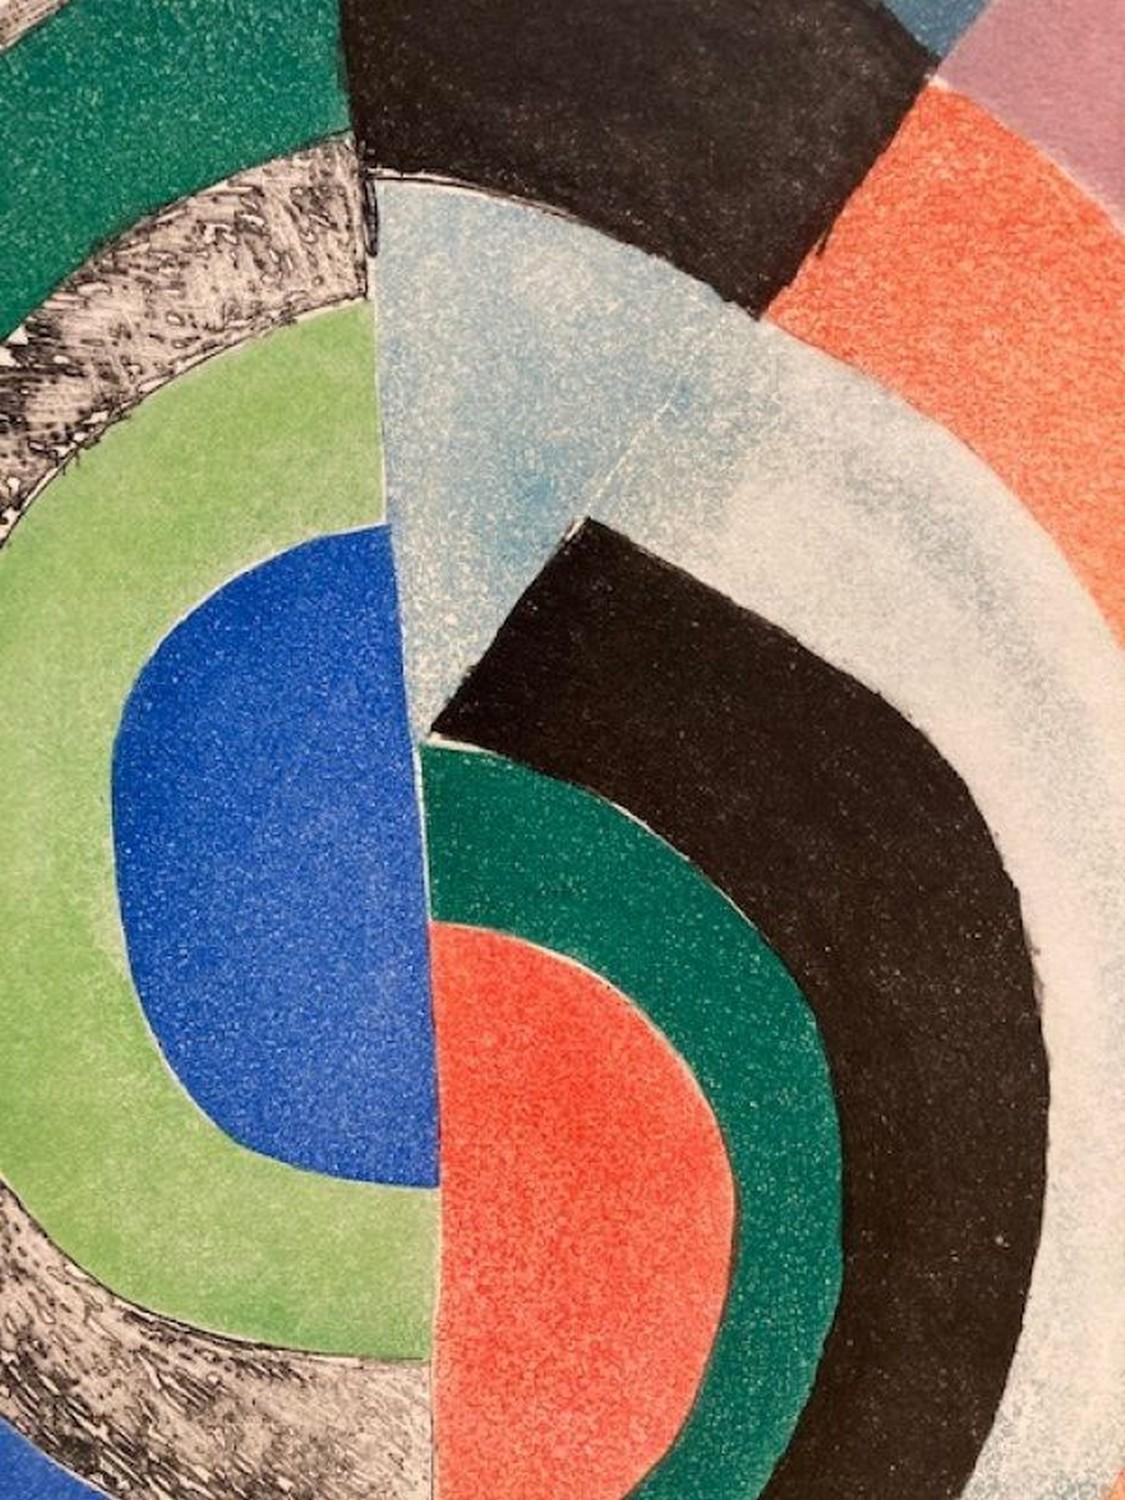 Demi-cercles  - Print by Sonia Delaunay